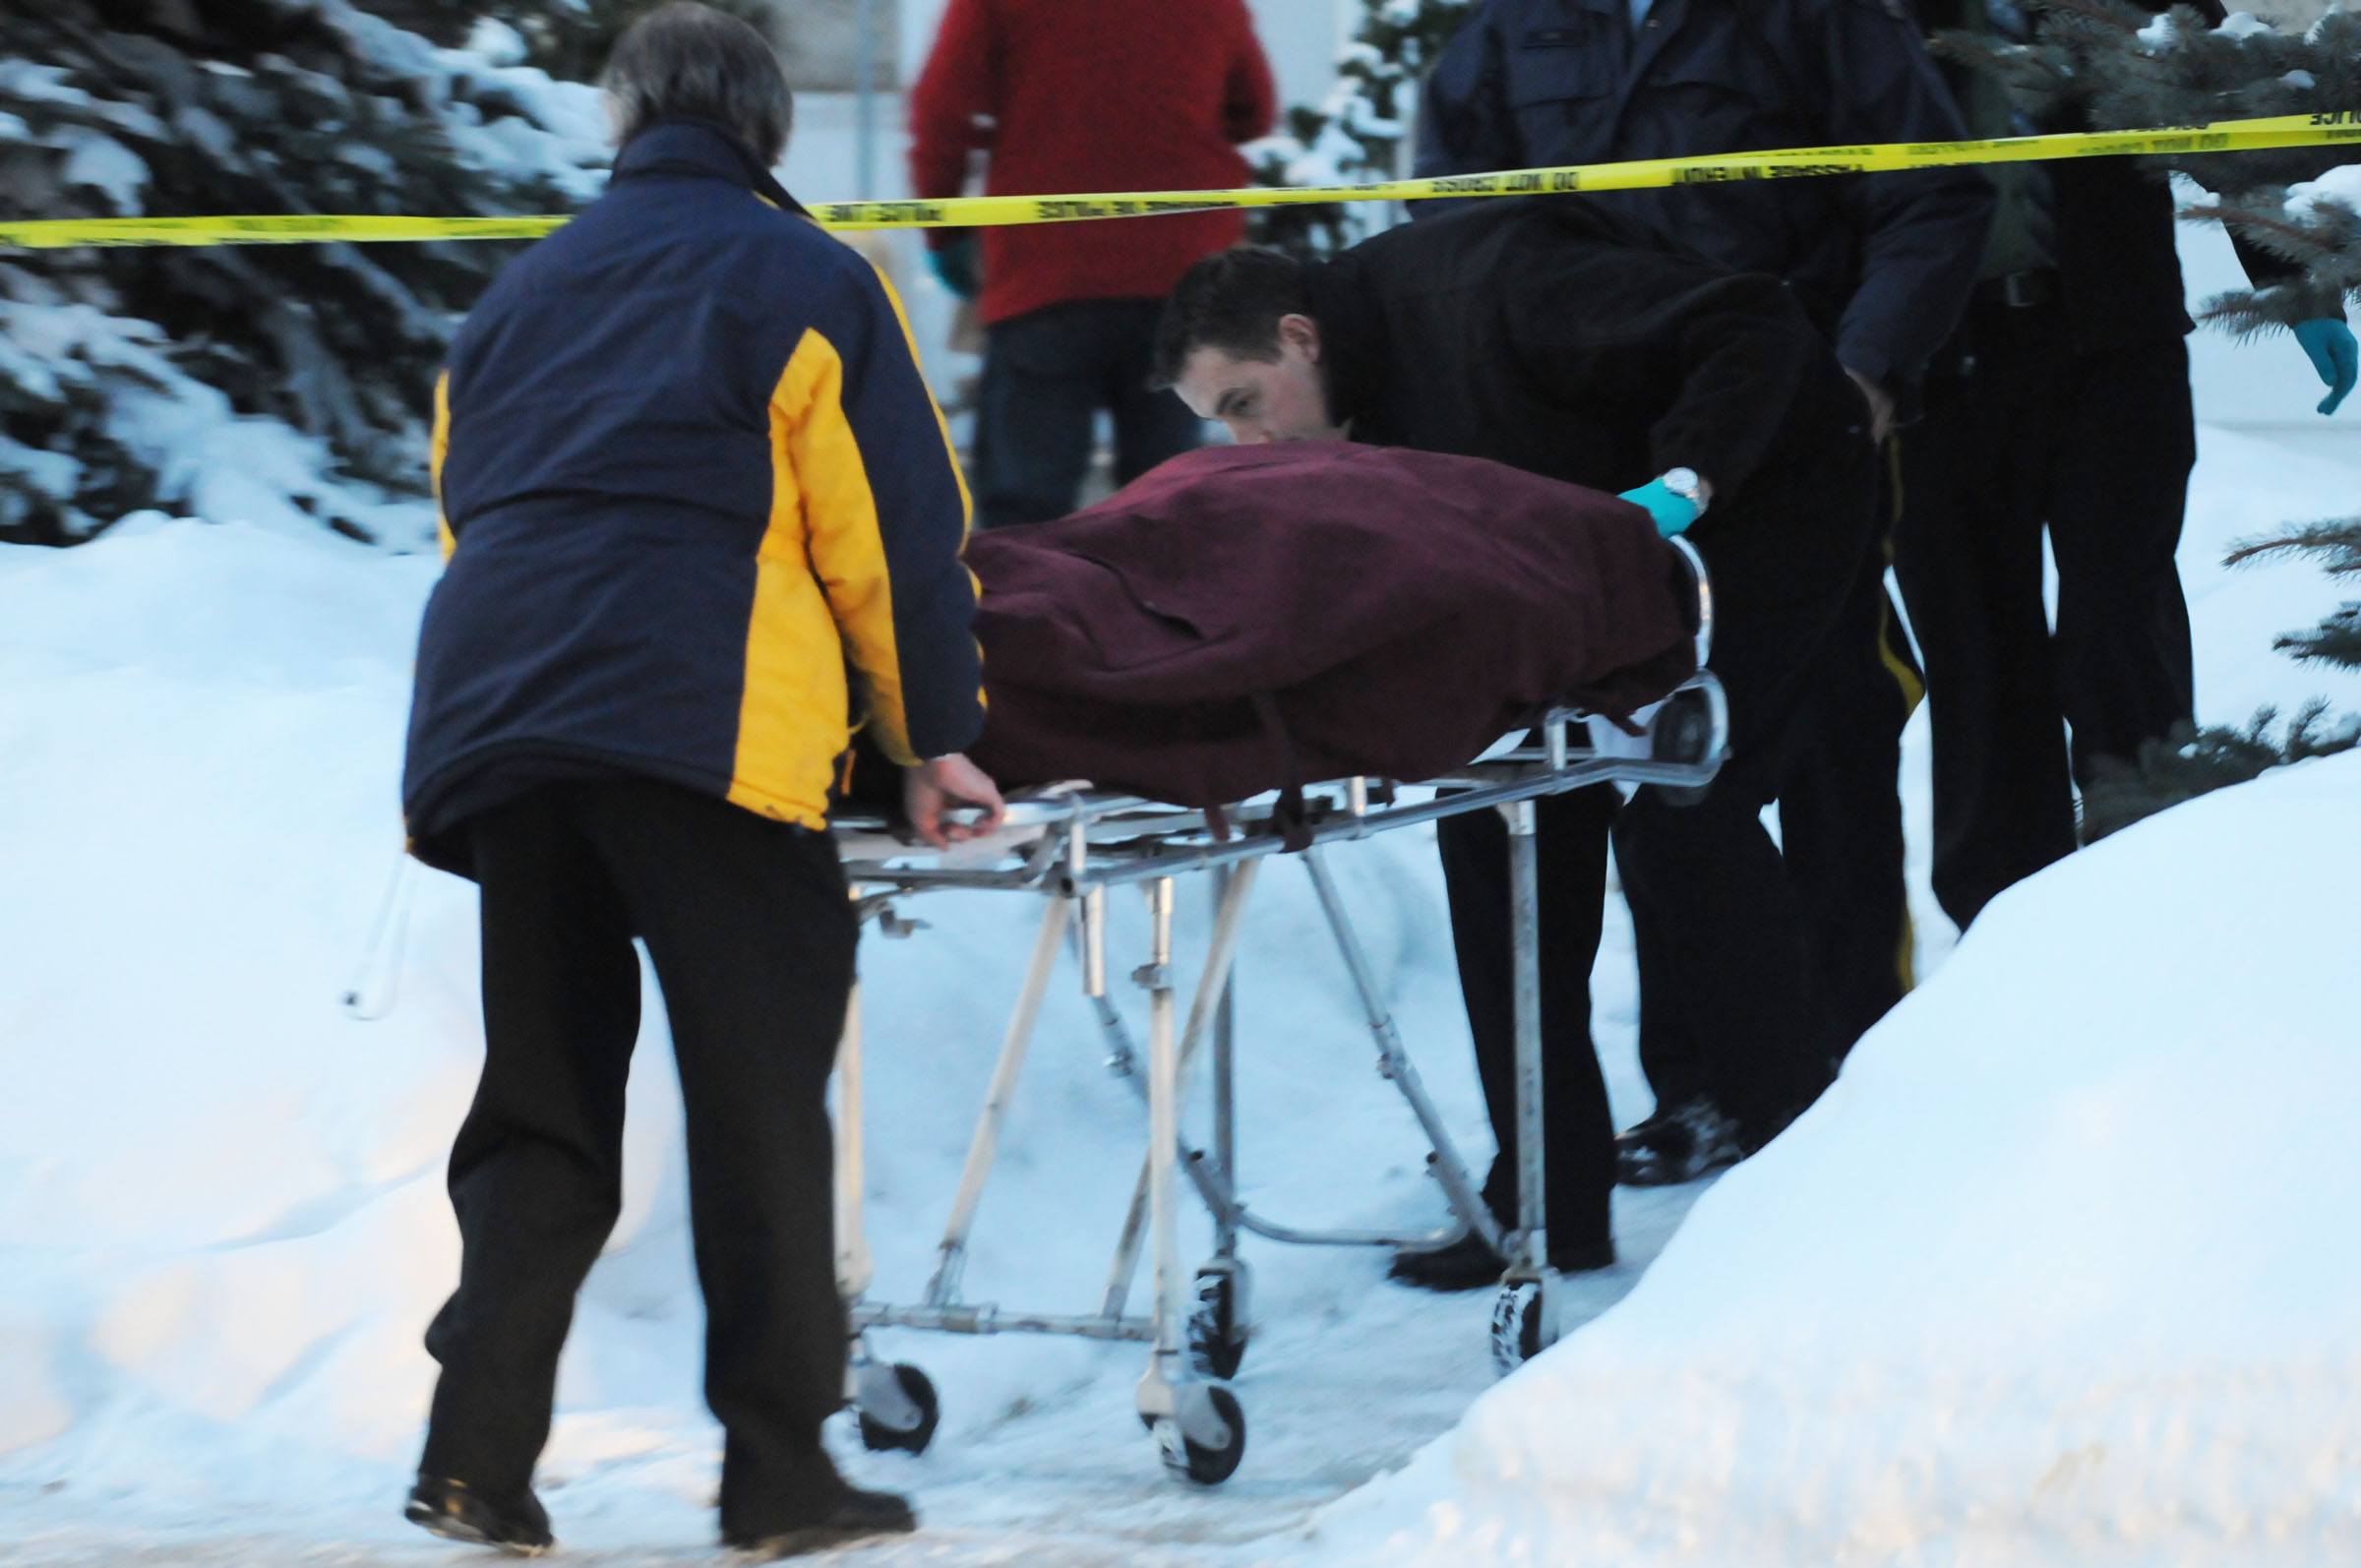 INVESTIGATION - RCMP members remove the body of a 40-year-old man who was found dead in a Fairview home early Thursday morning.